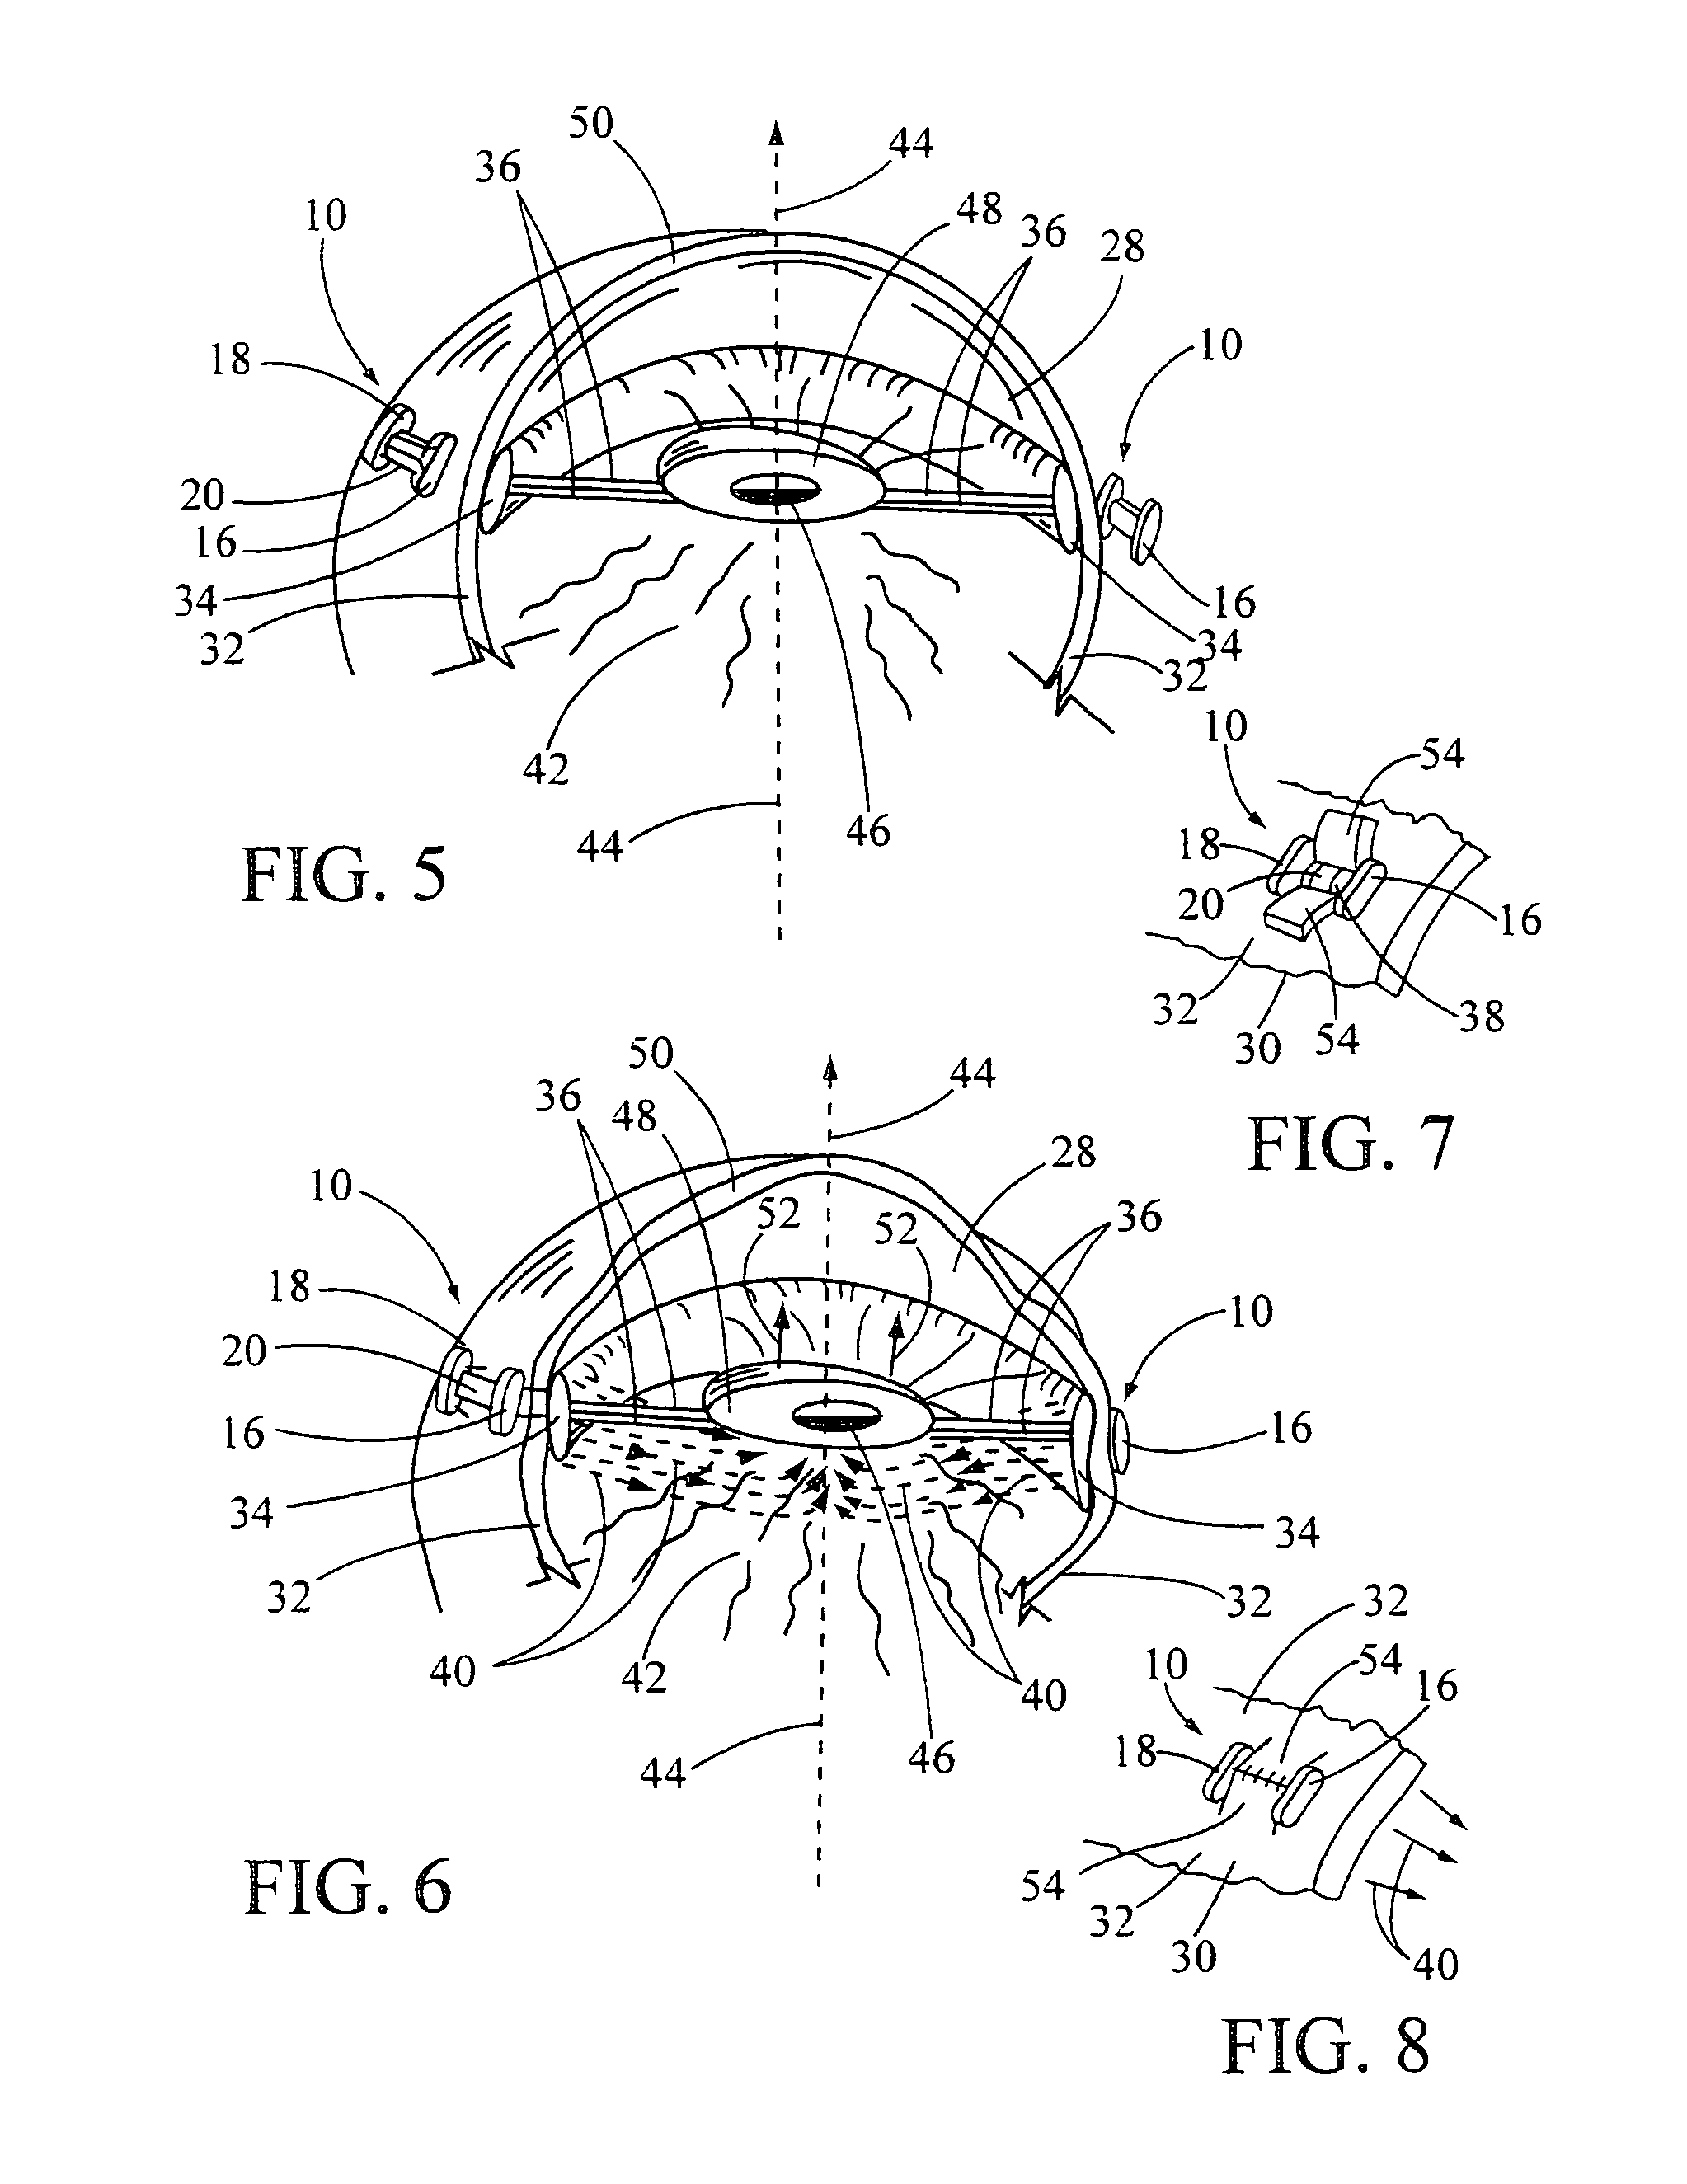 Reading enhancement device for preventing and treating presbyopia of the eye